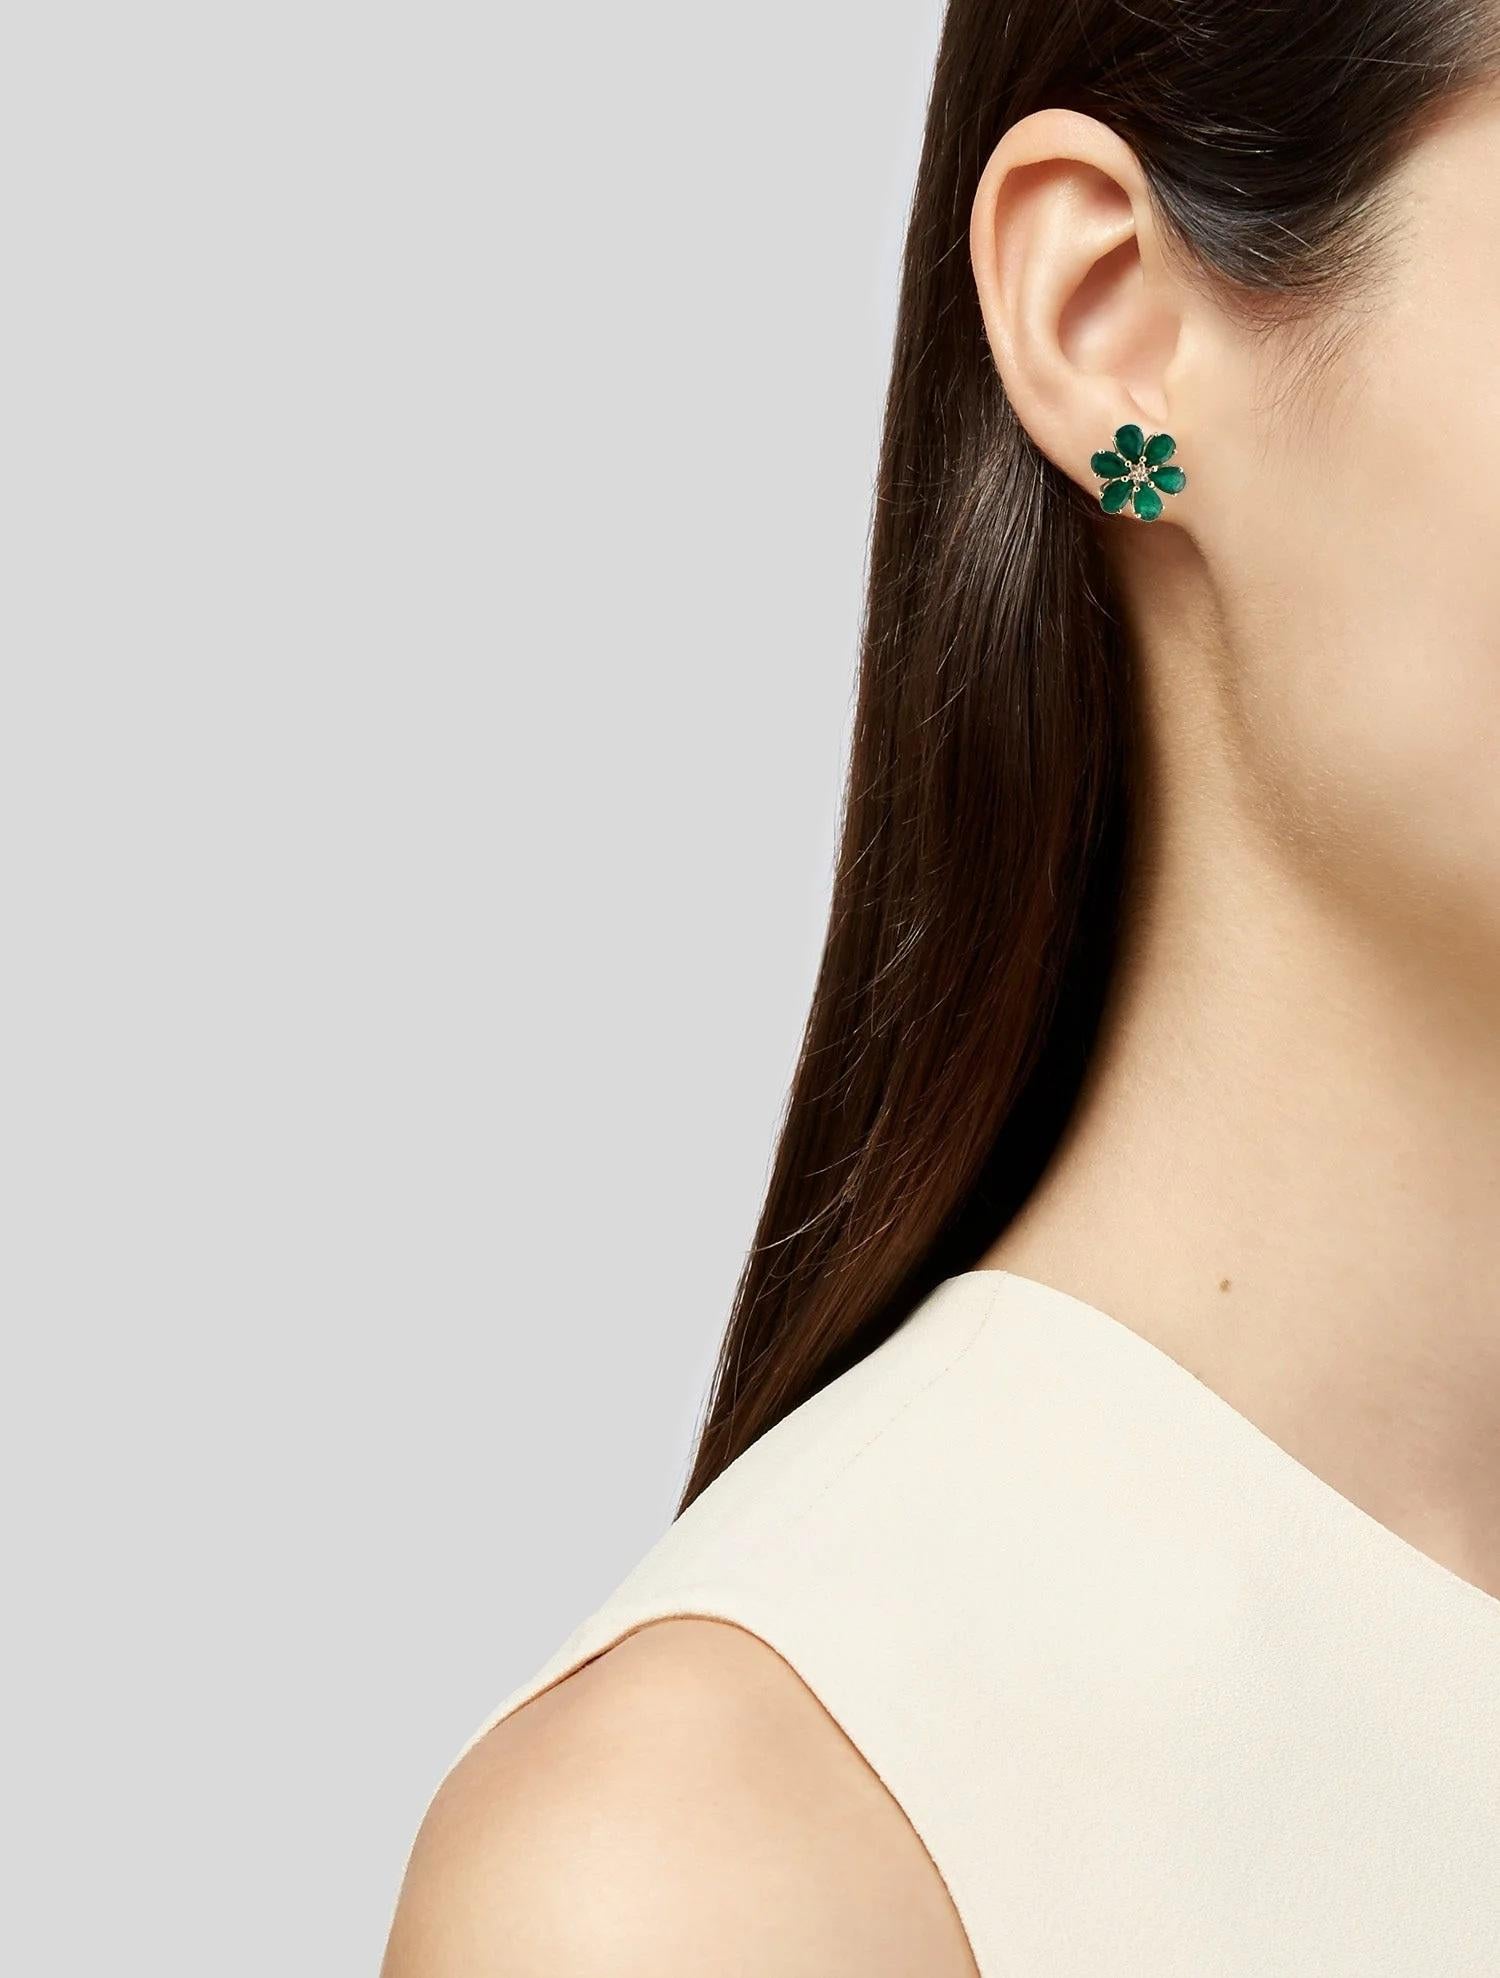 Discover the epitome of elegance with these luxurious 14K yellow gold earrings, adorned with pear modified brilliant emeralds totaling 4.68 carats, complemented by the delicate shimmer of near colorless diamonds. The vibrant green emeralds, each